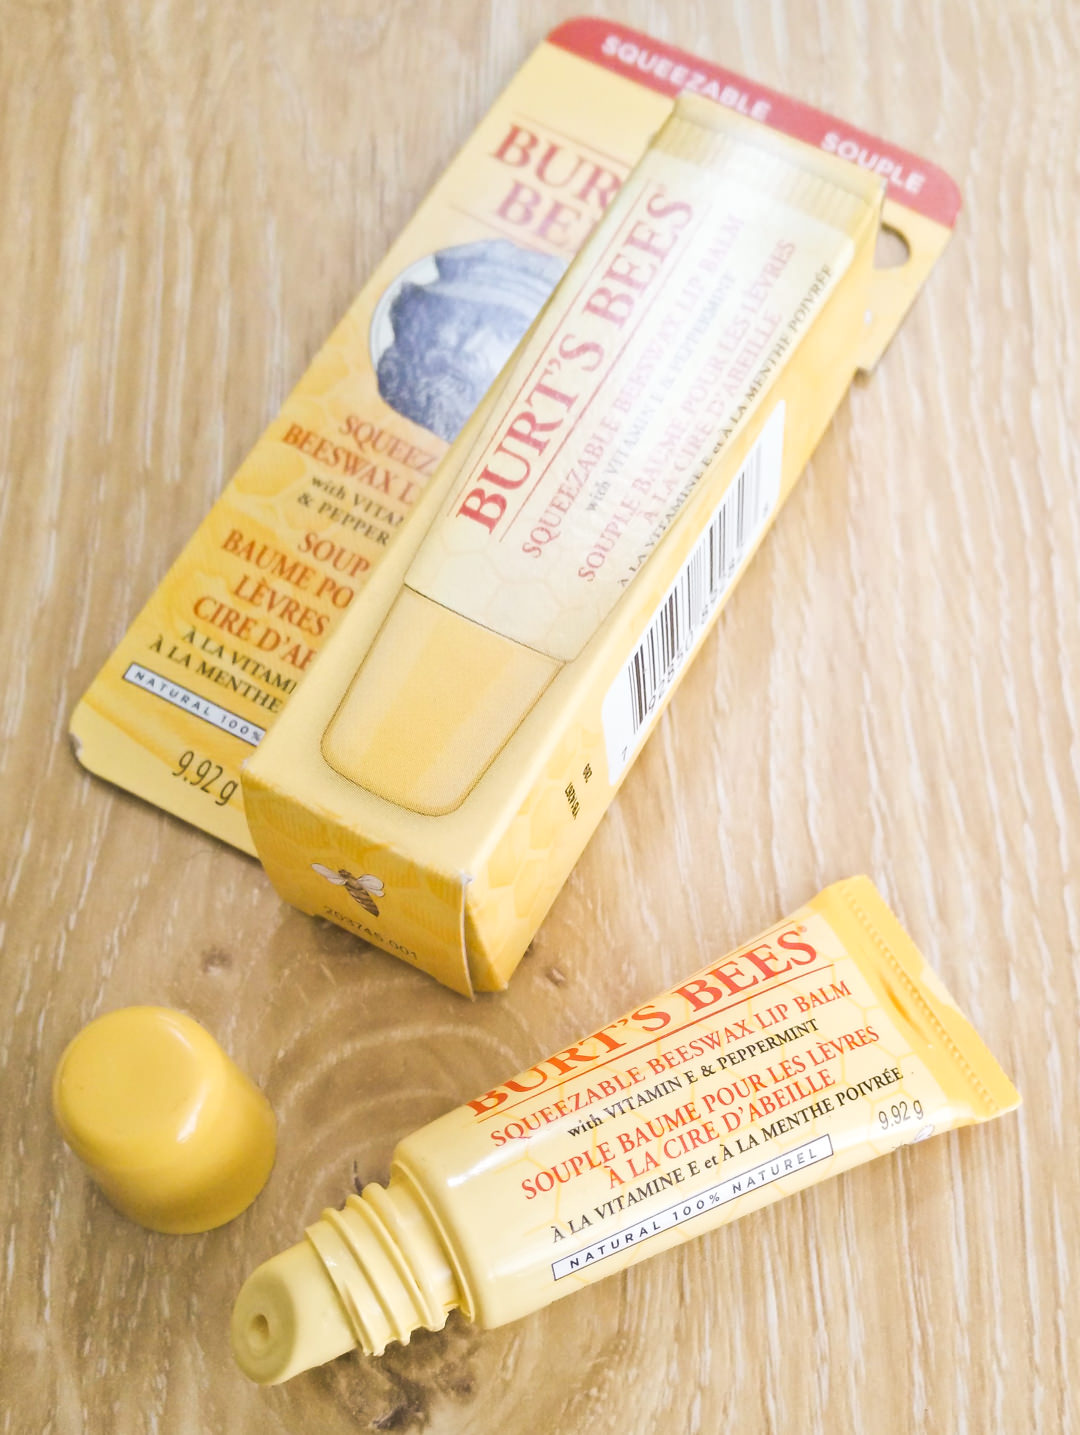 burts bees review